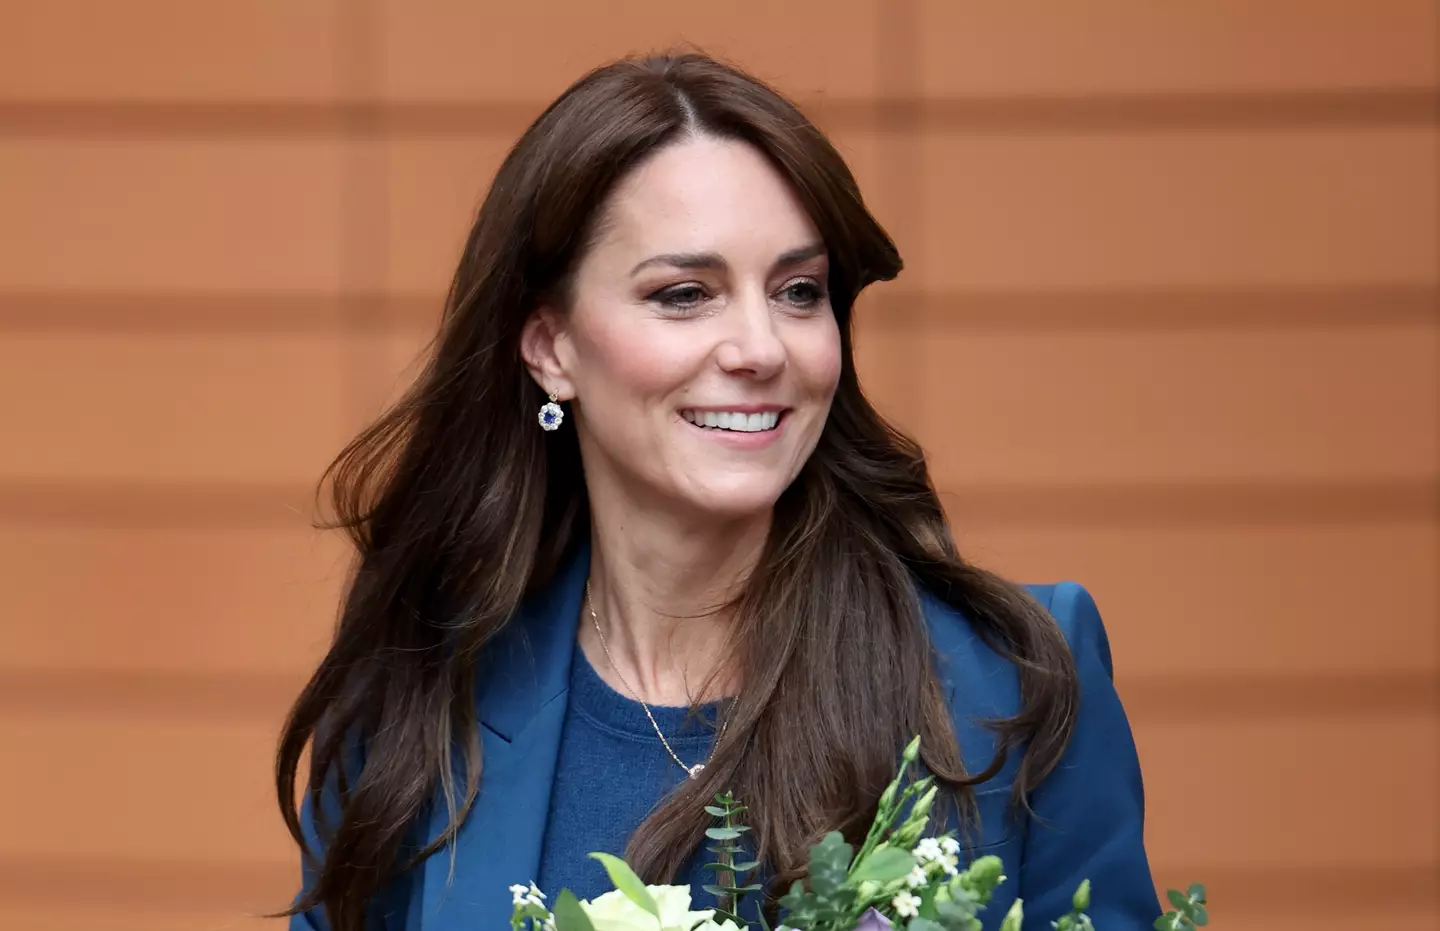 Social media users offered their support for Kate in the comments.